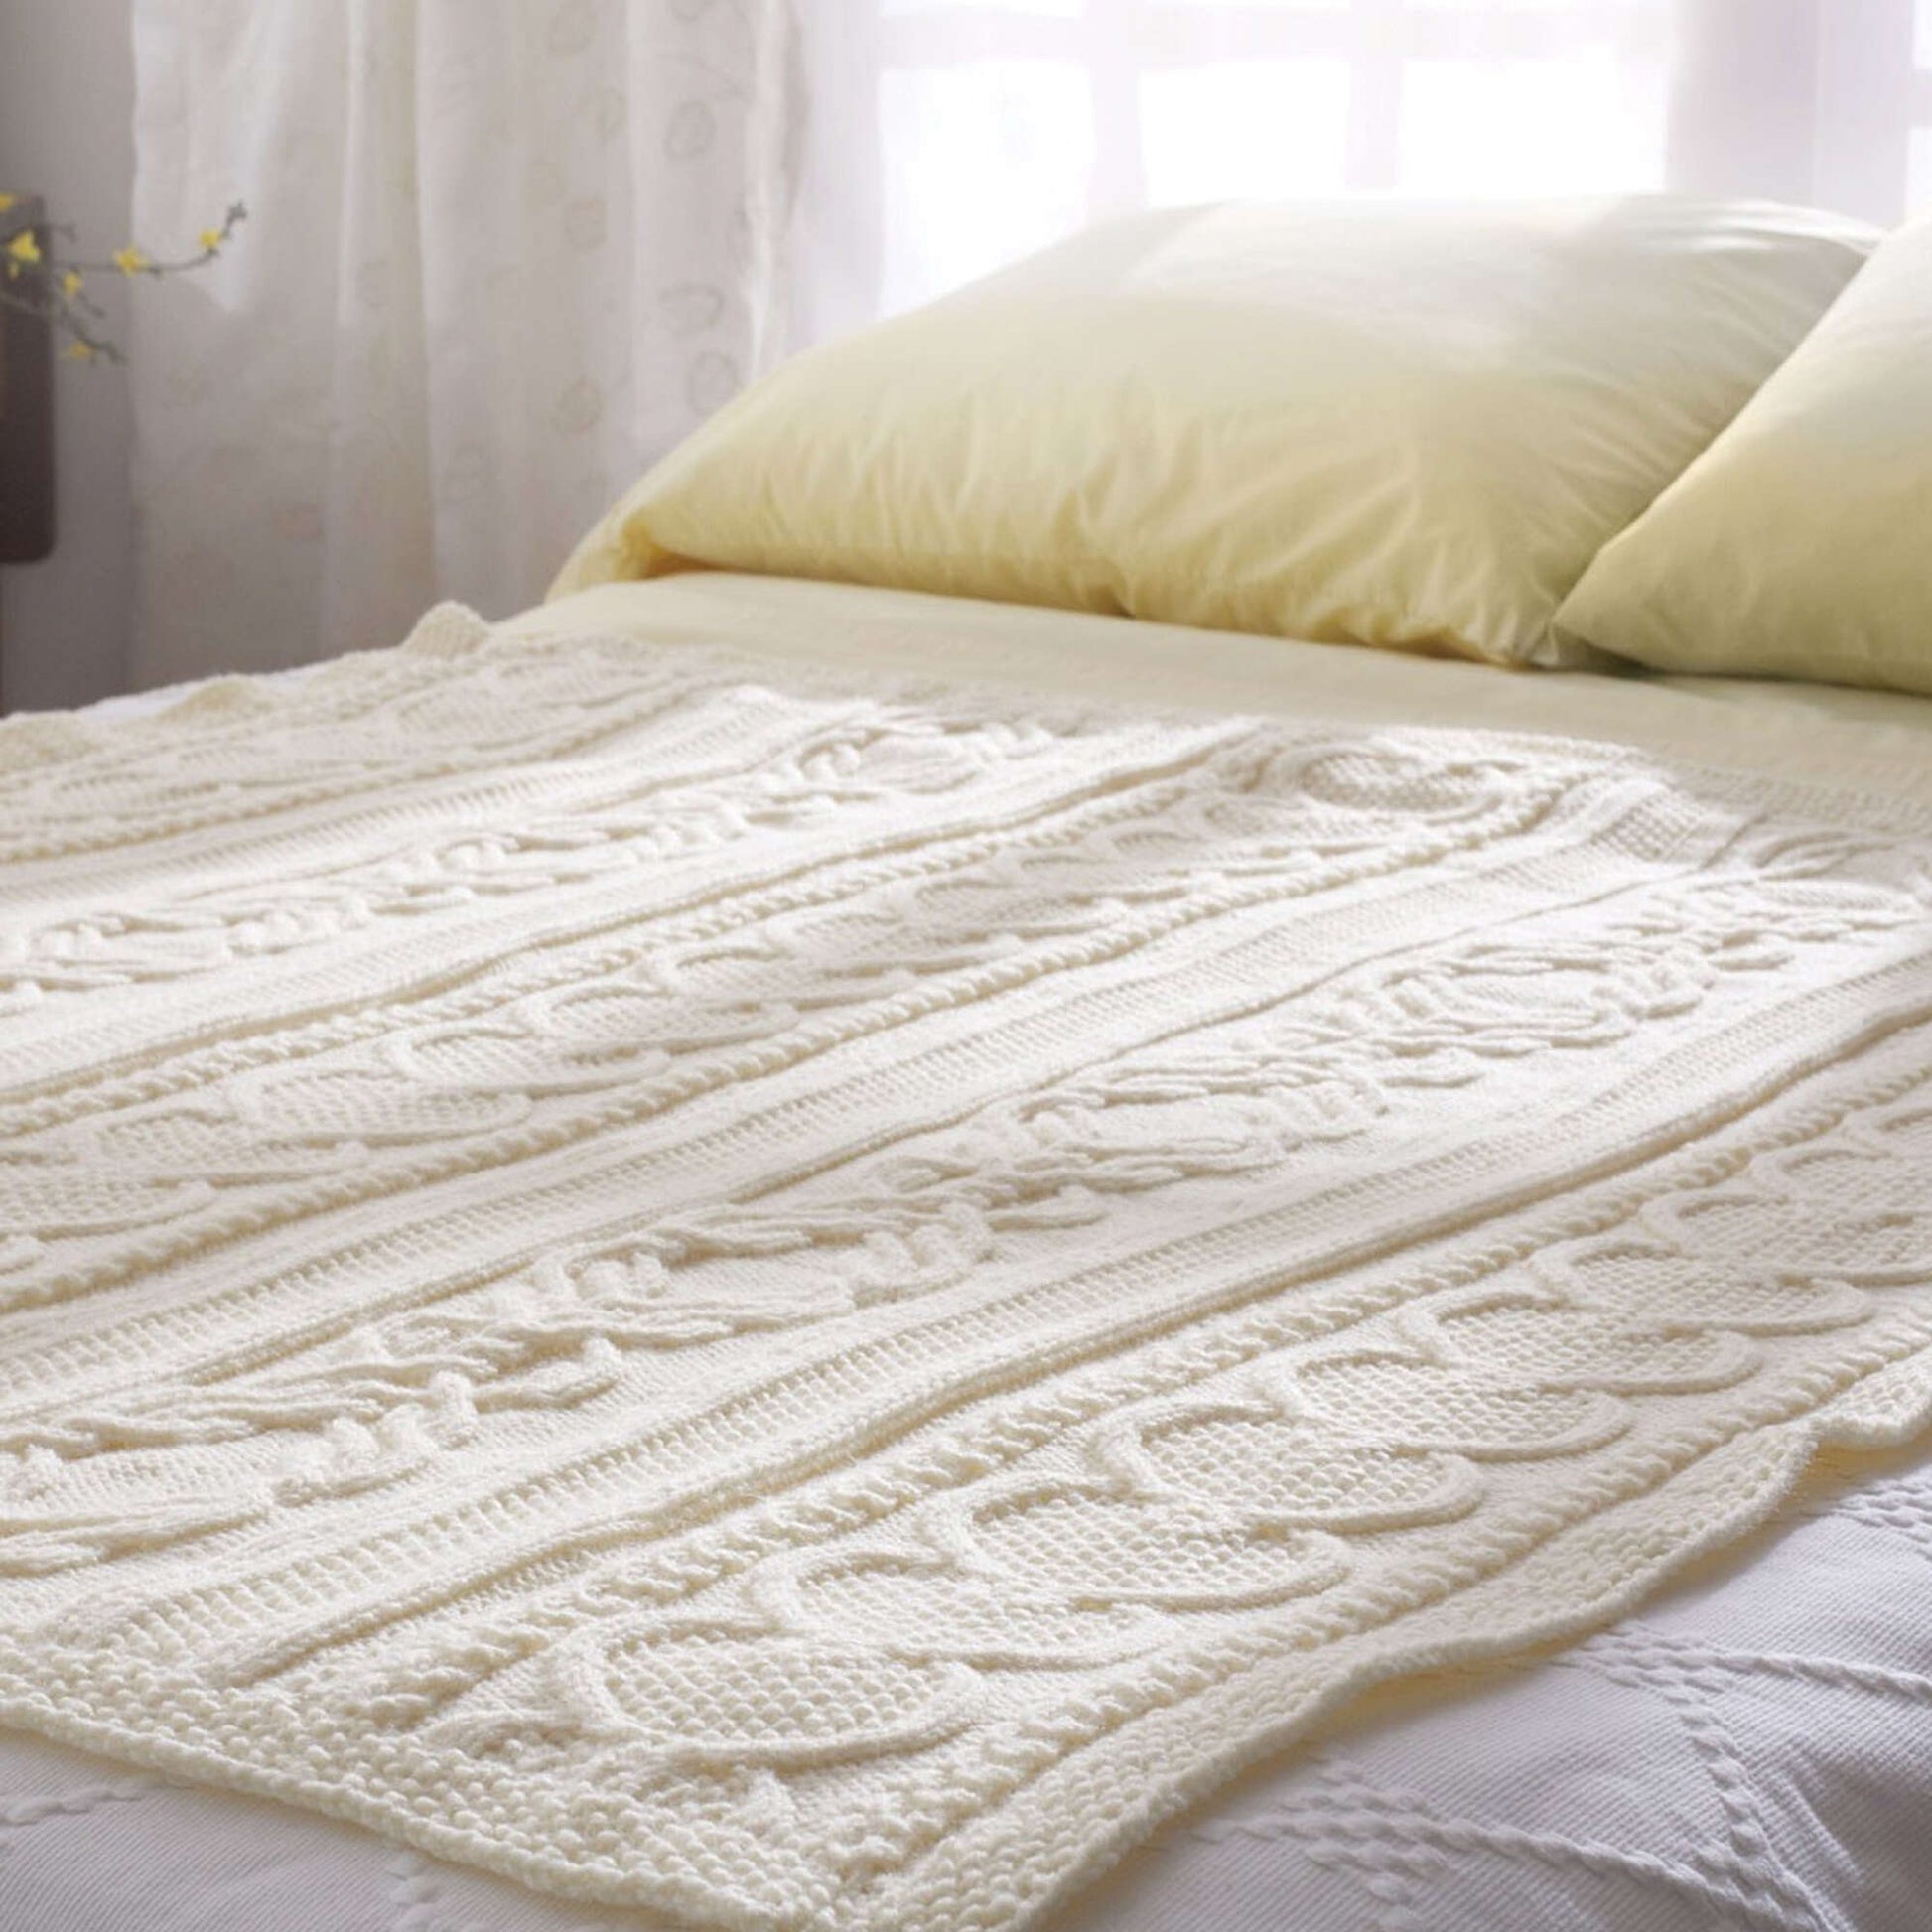 Free Bernat Gift Of Love Cable Afghan Knit Pattern